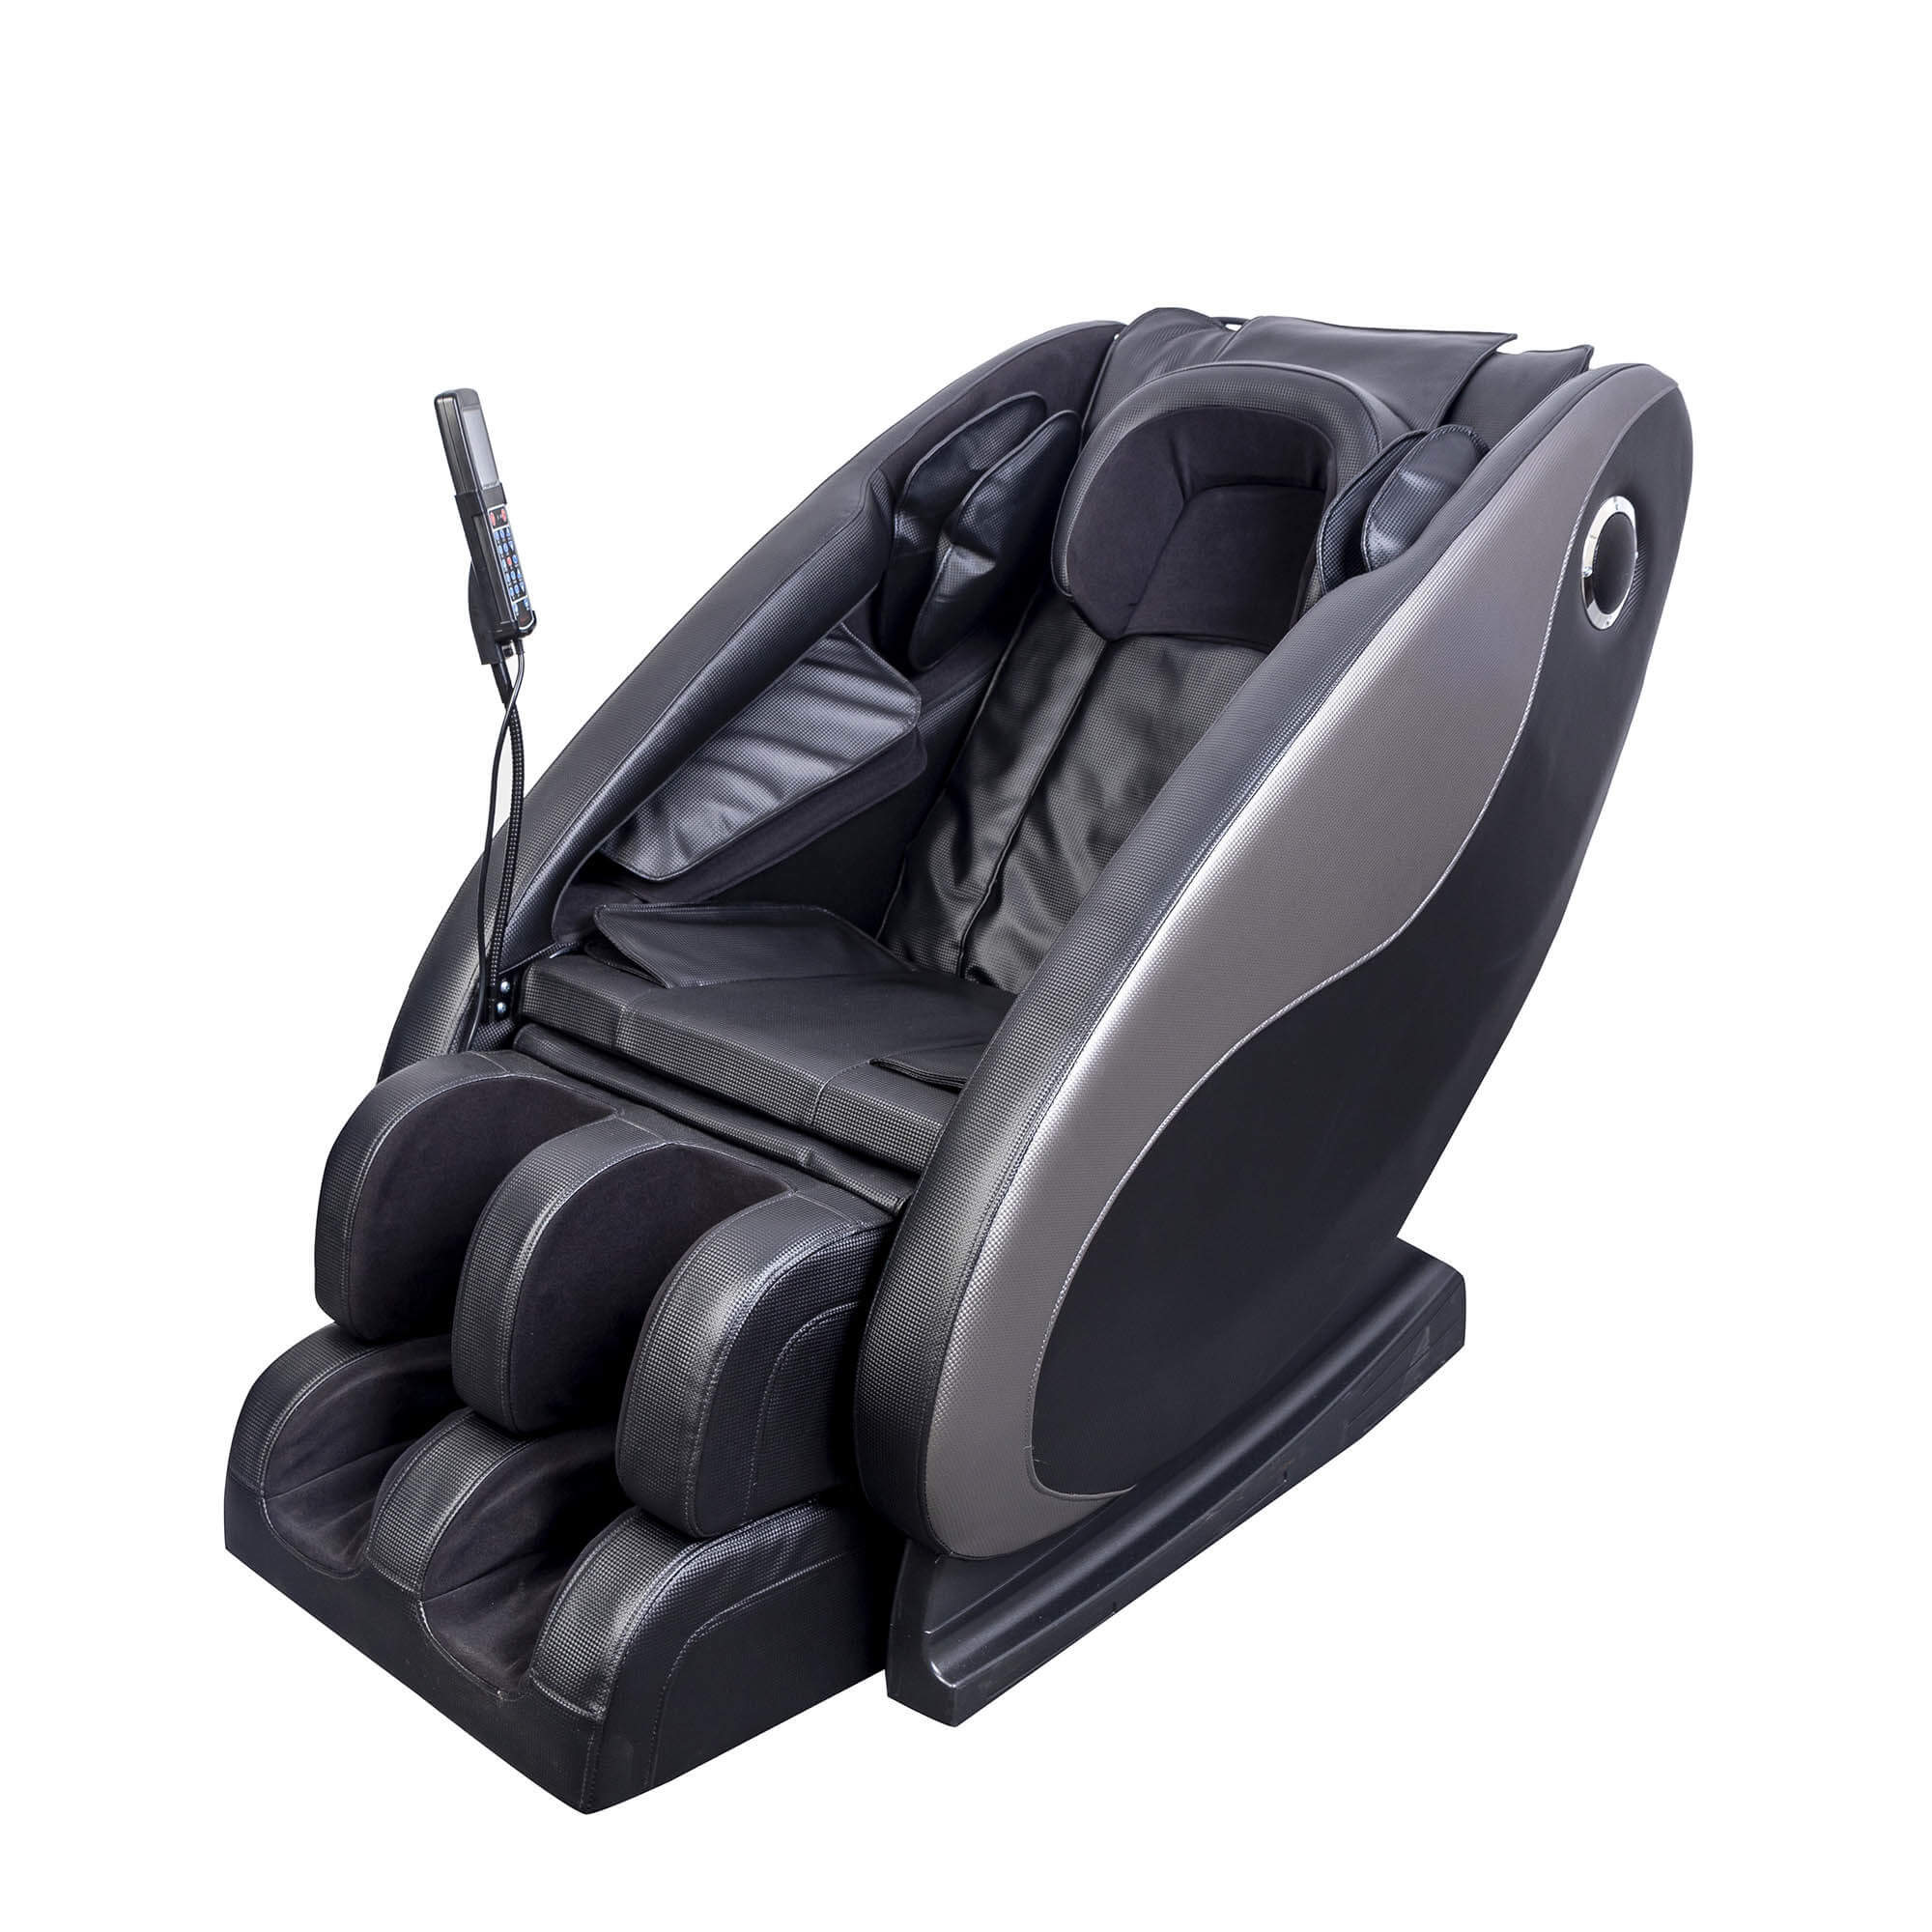 How to buy a cheap massage chair for New-year gift?